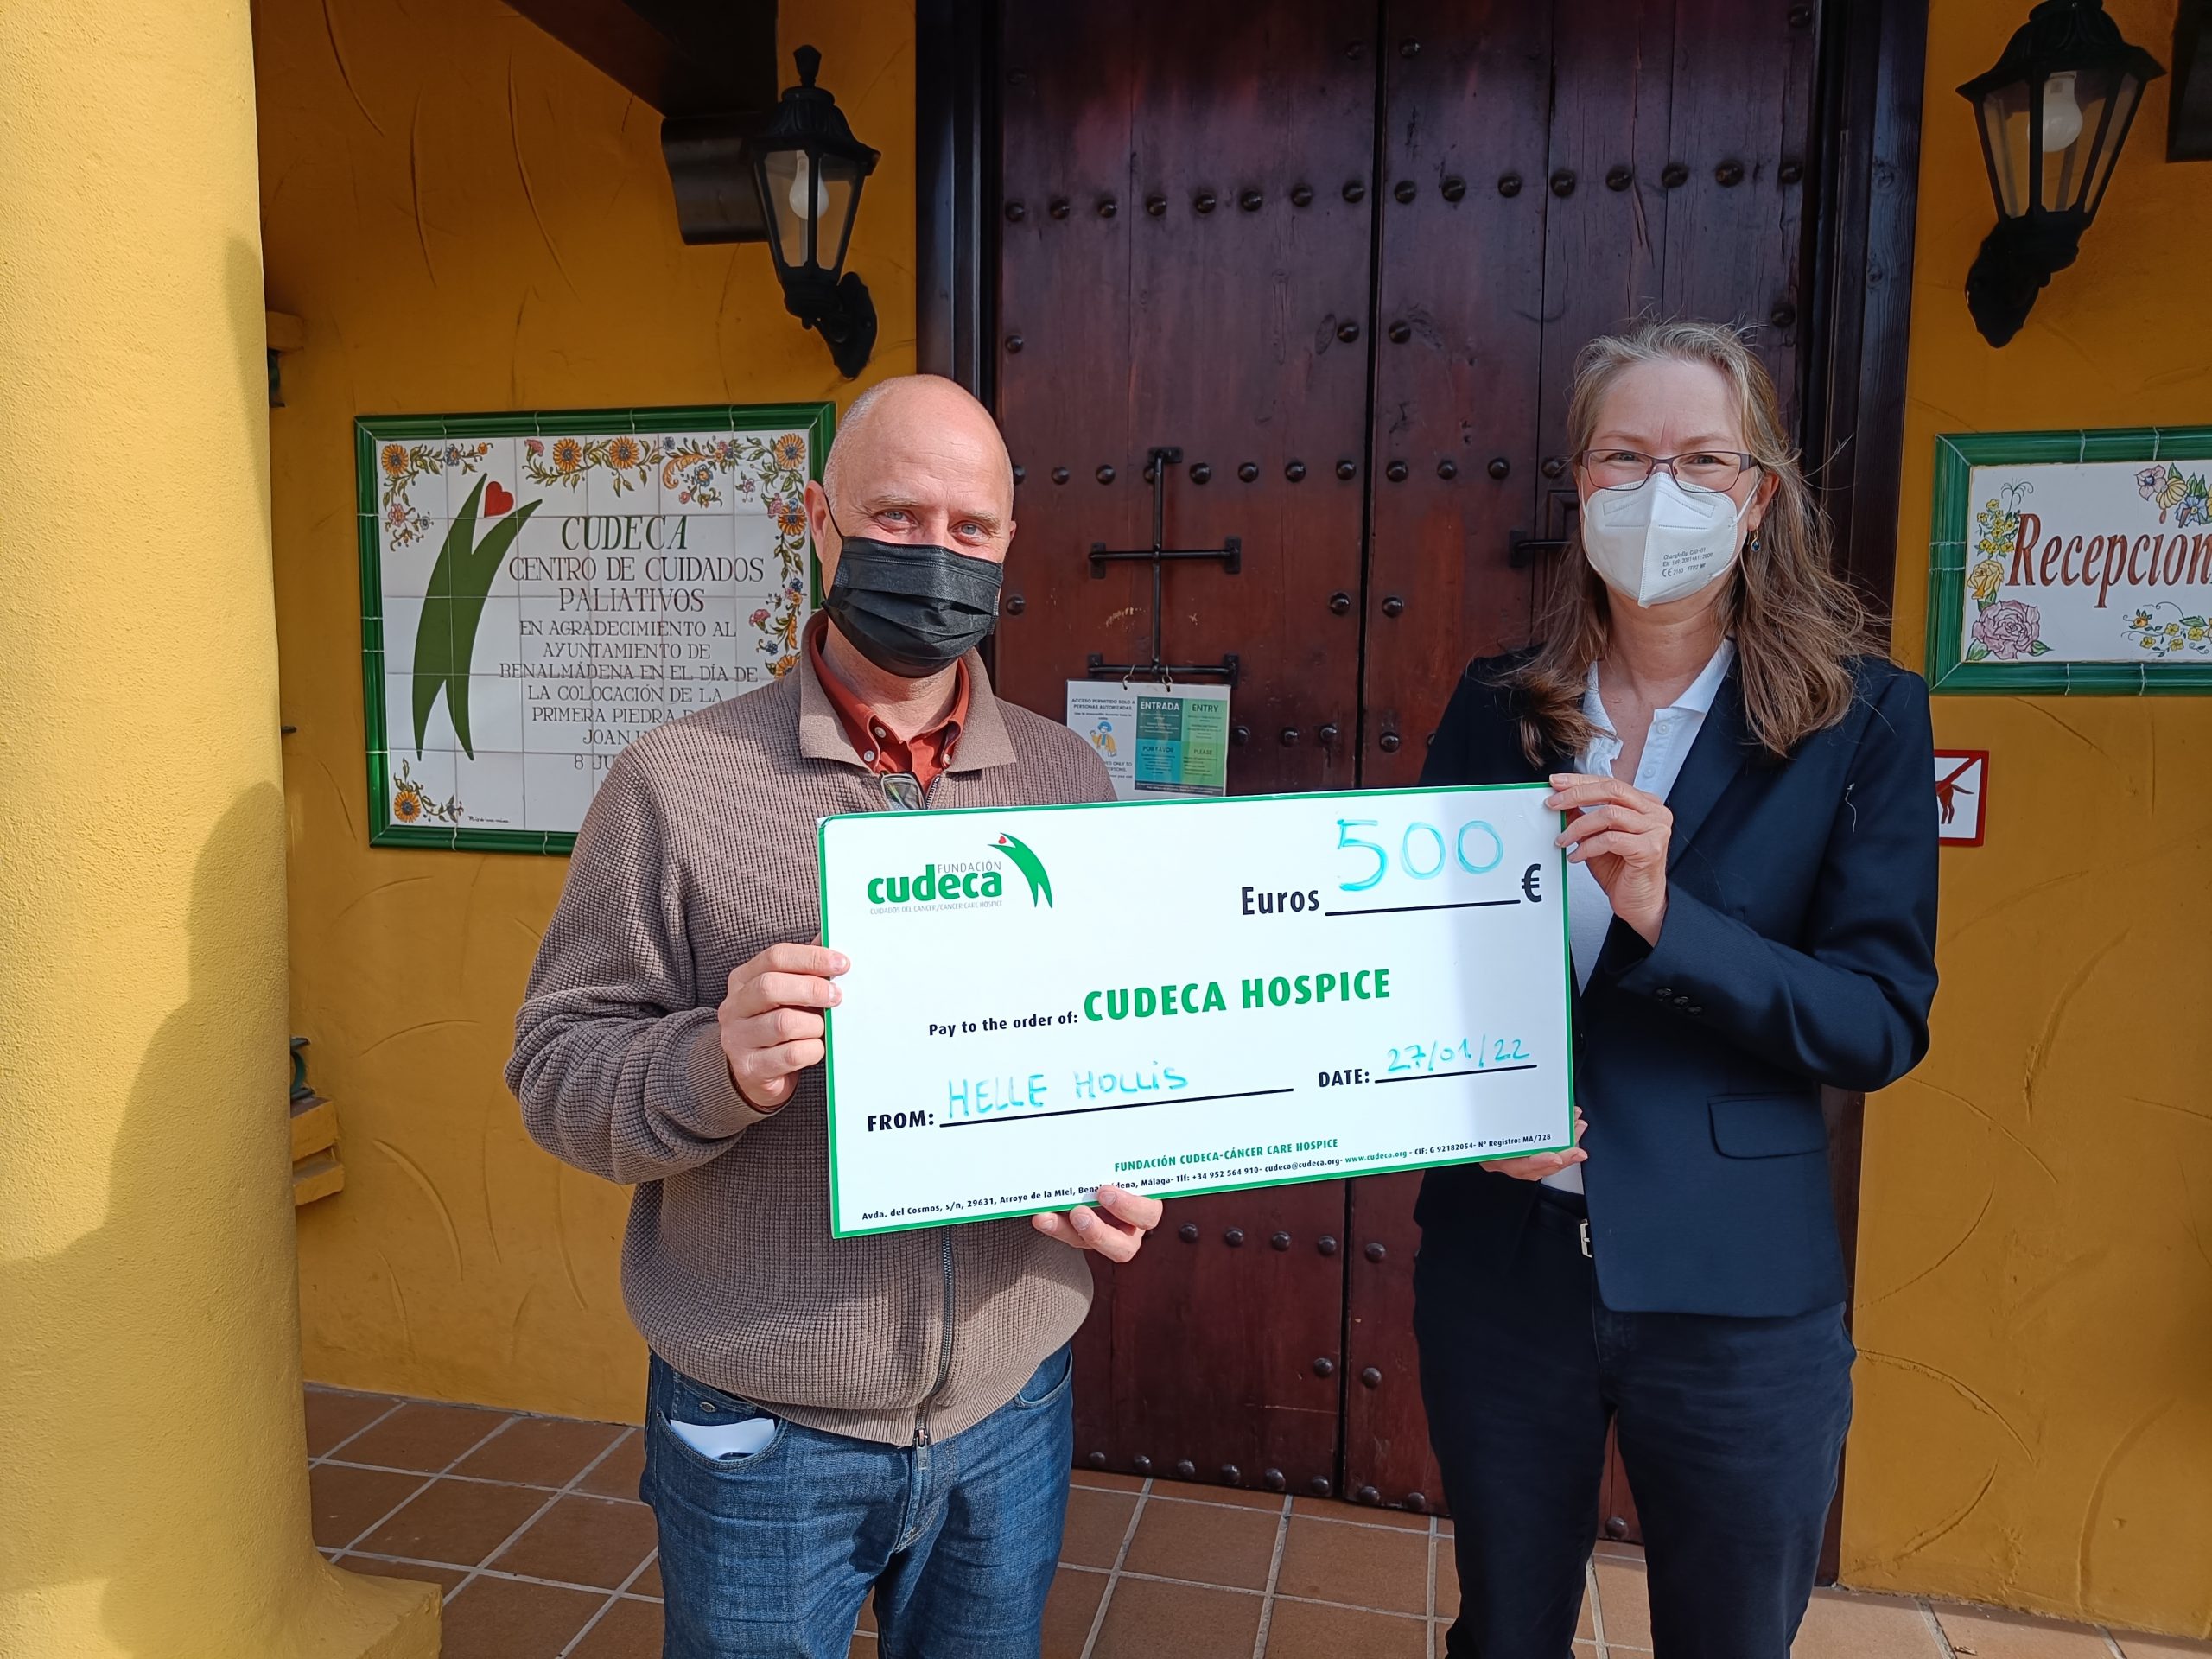 Helle Hollis raises €500 with its charity car hire